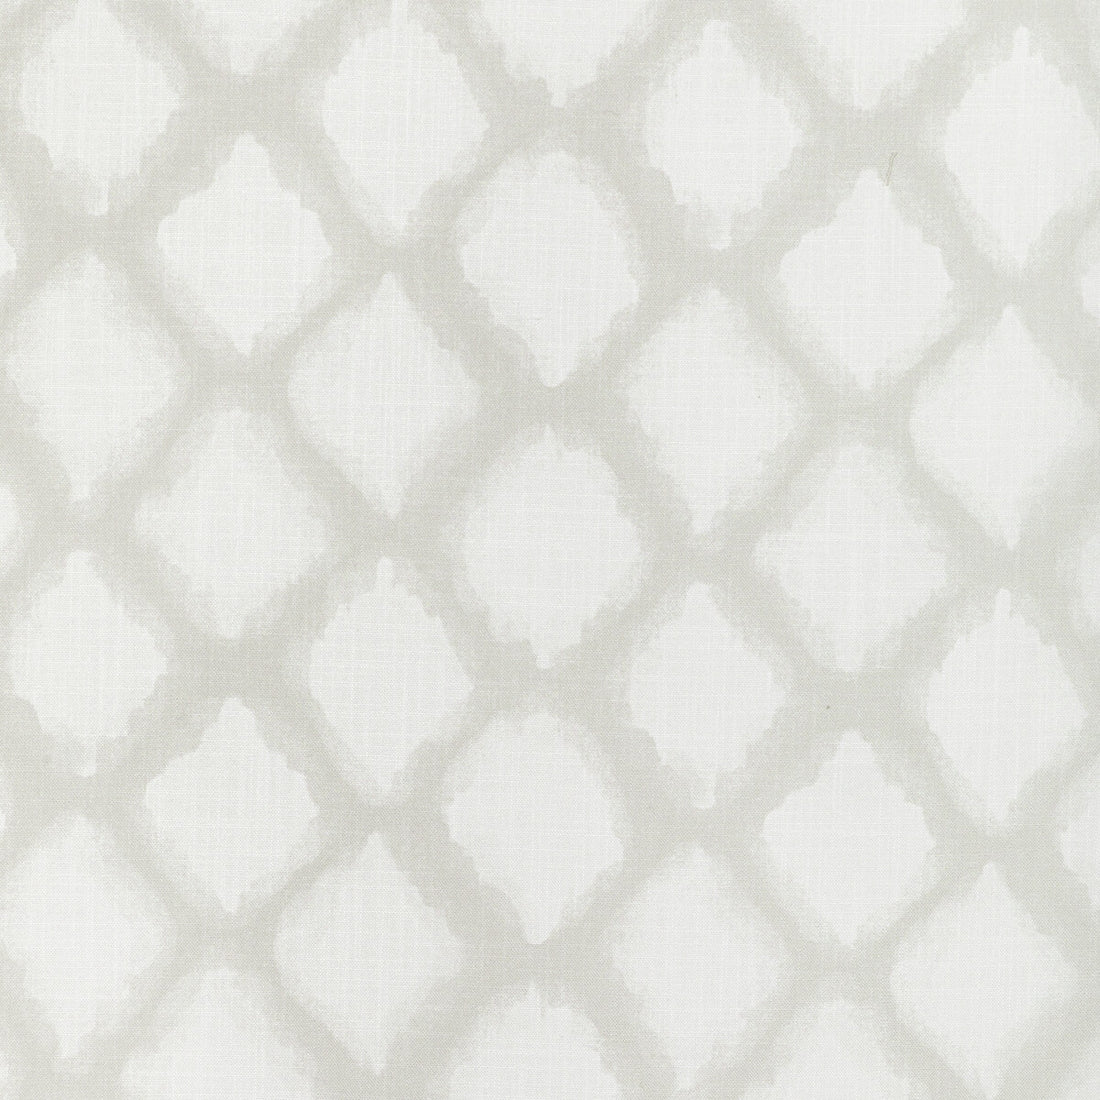 Fuzzy fabric in linen color - pattern FUZZY.161.0 - by Kravet Basics